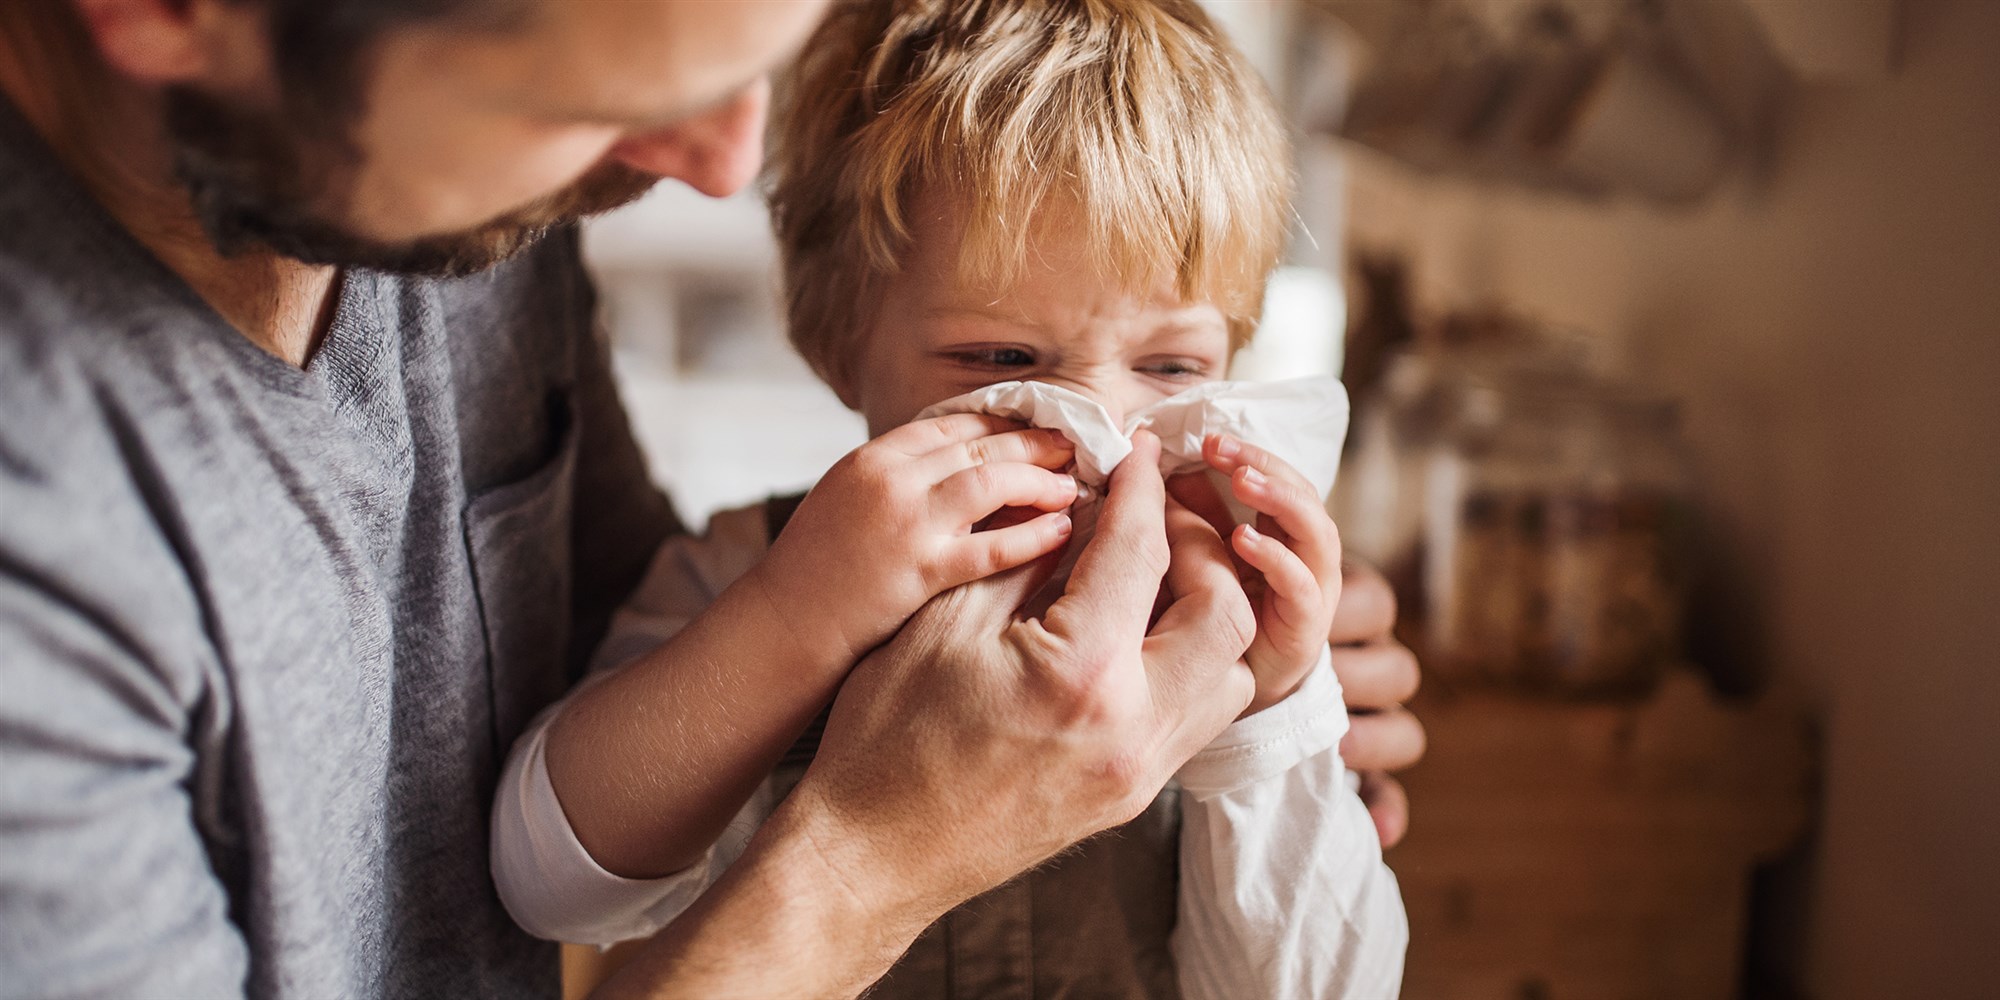 Recipes that help recover from cold and cough for kids